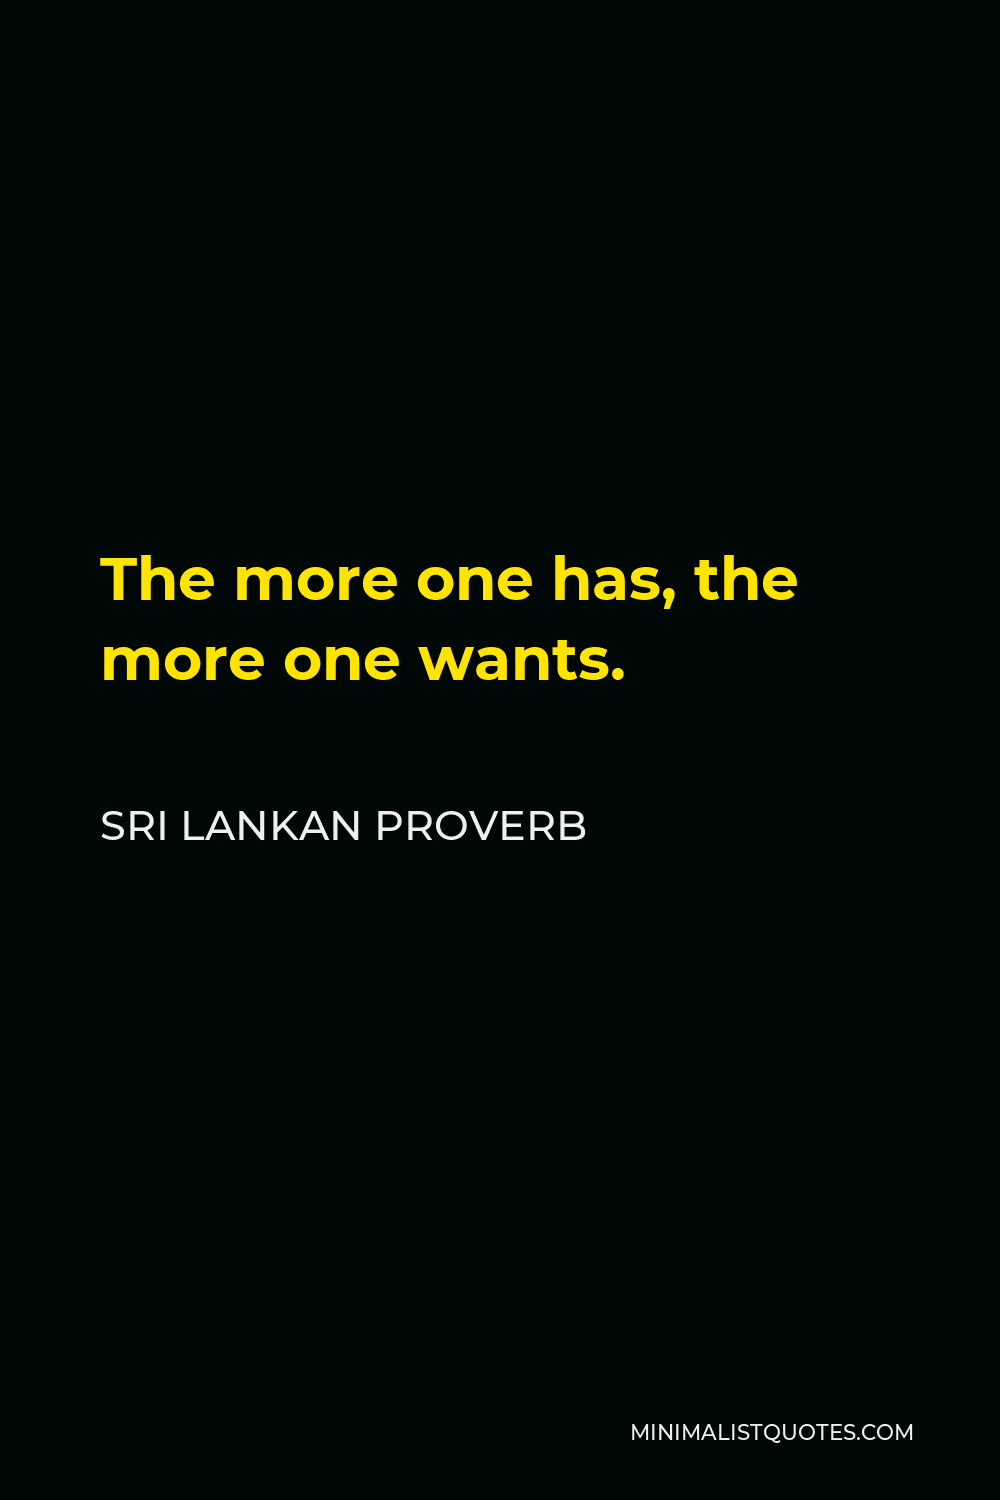 Sri Lankan Proverb Quote - The more one has, the more one wants.